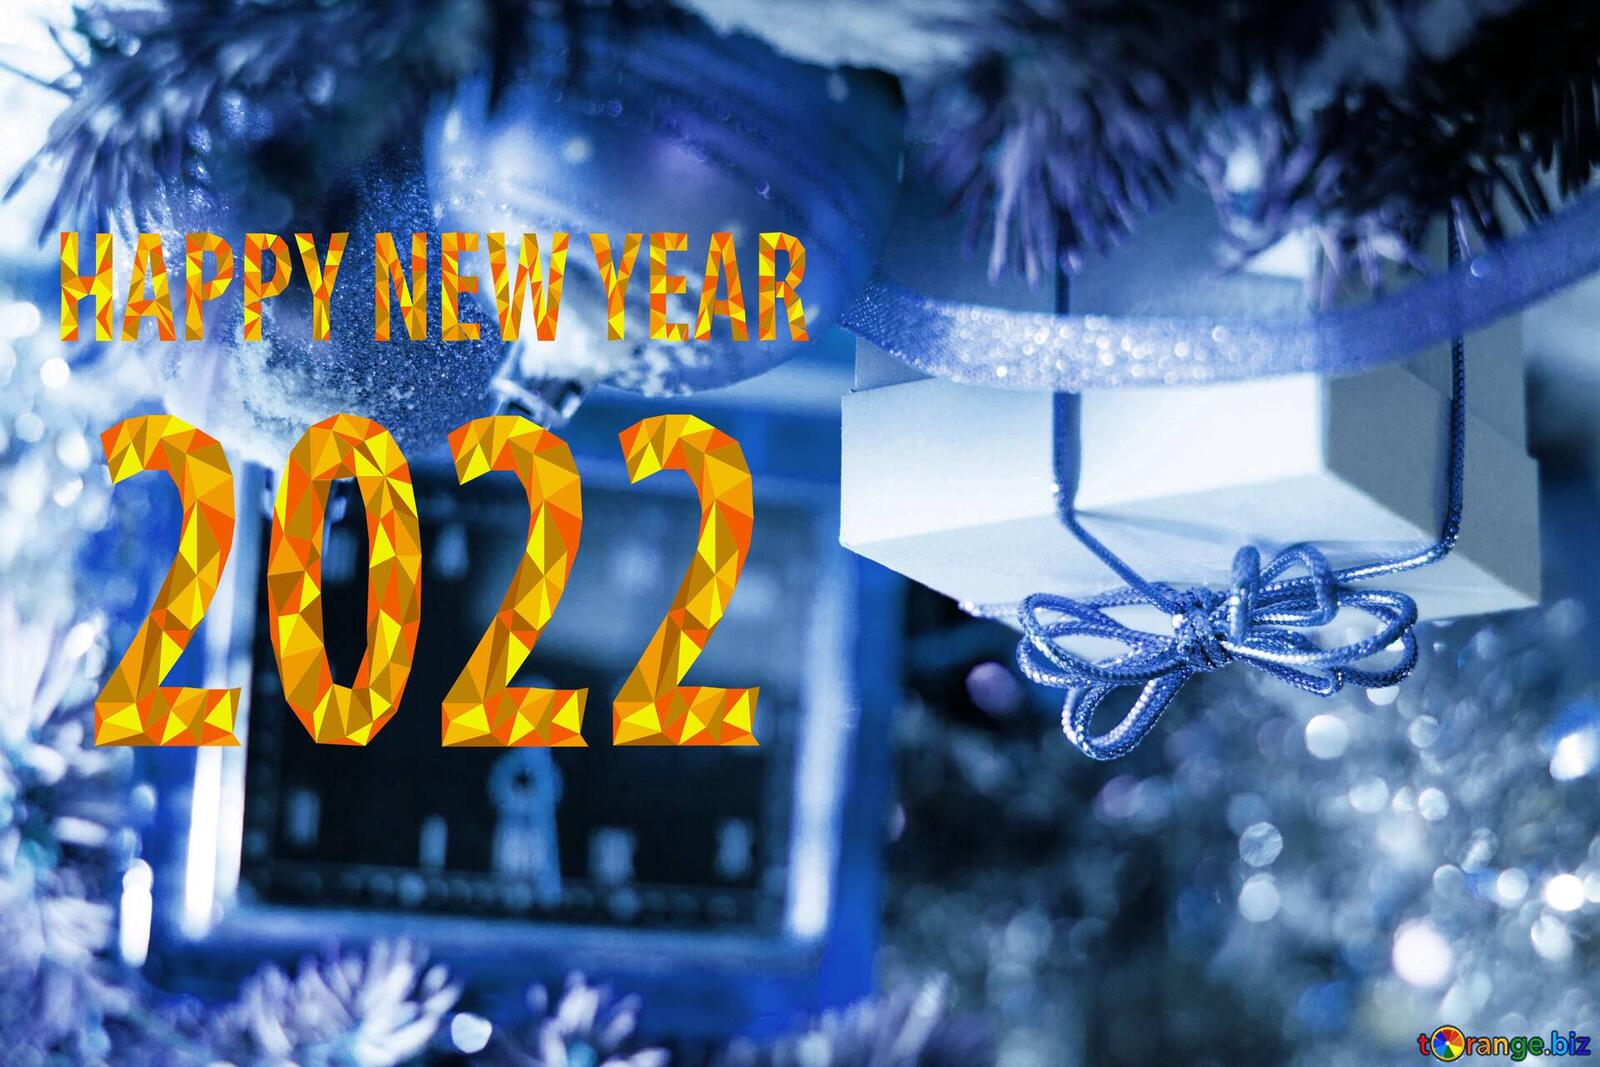 Wallpapers 2022 gift with 2022 on the desktop